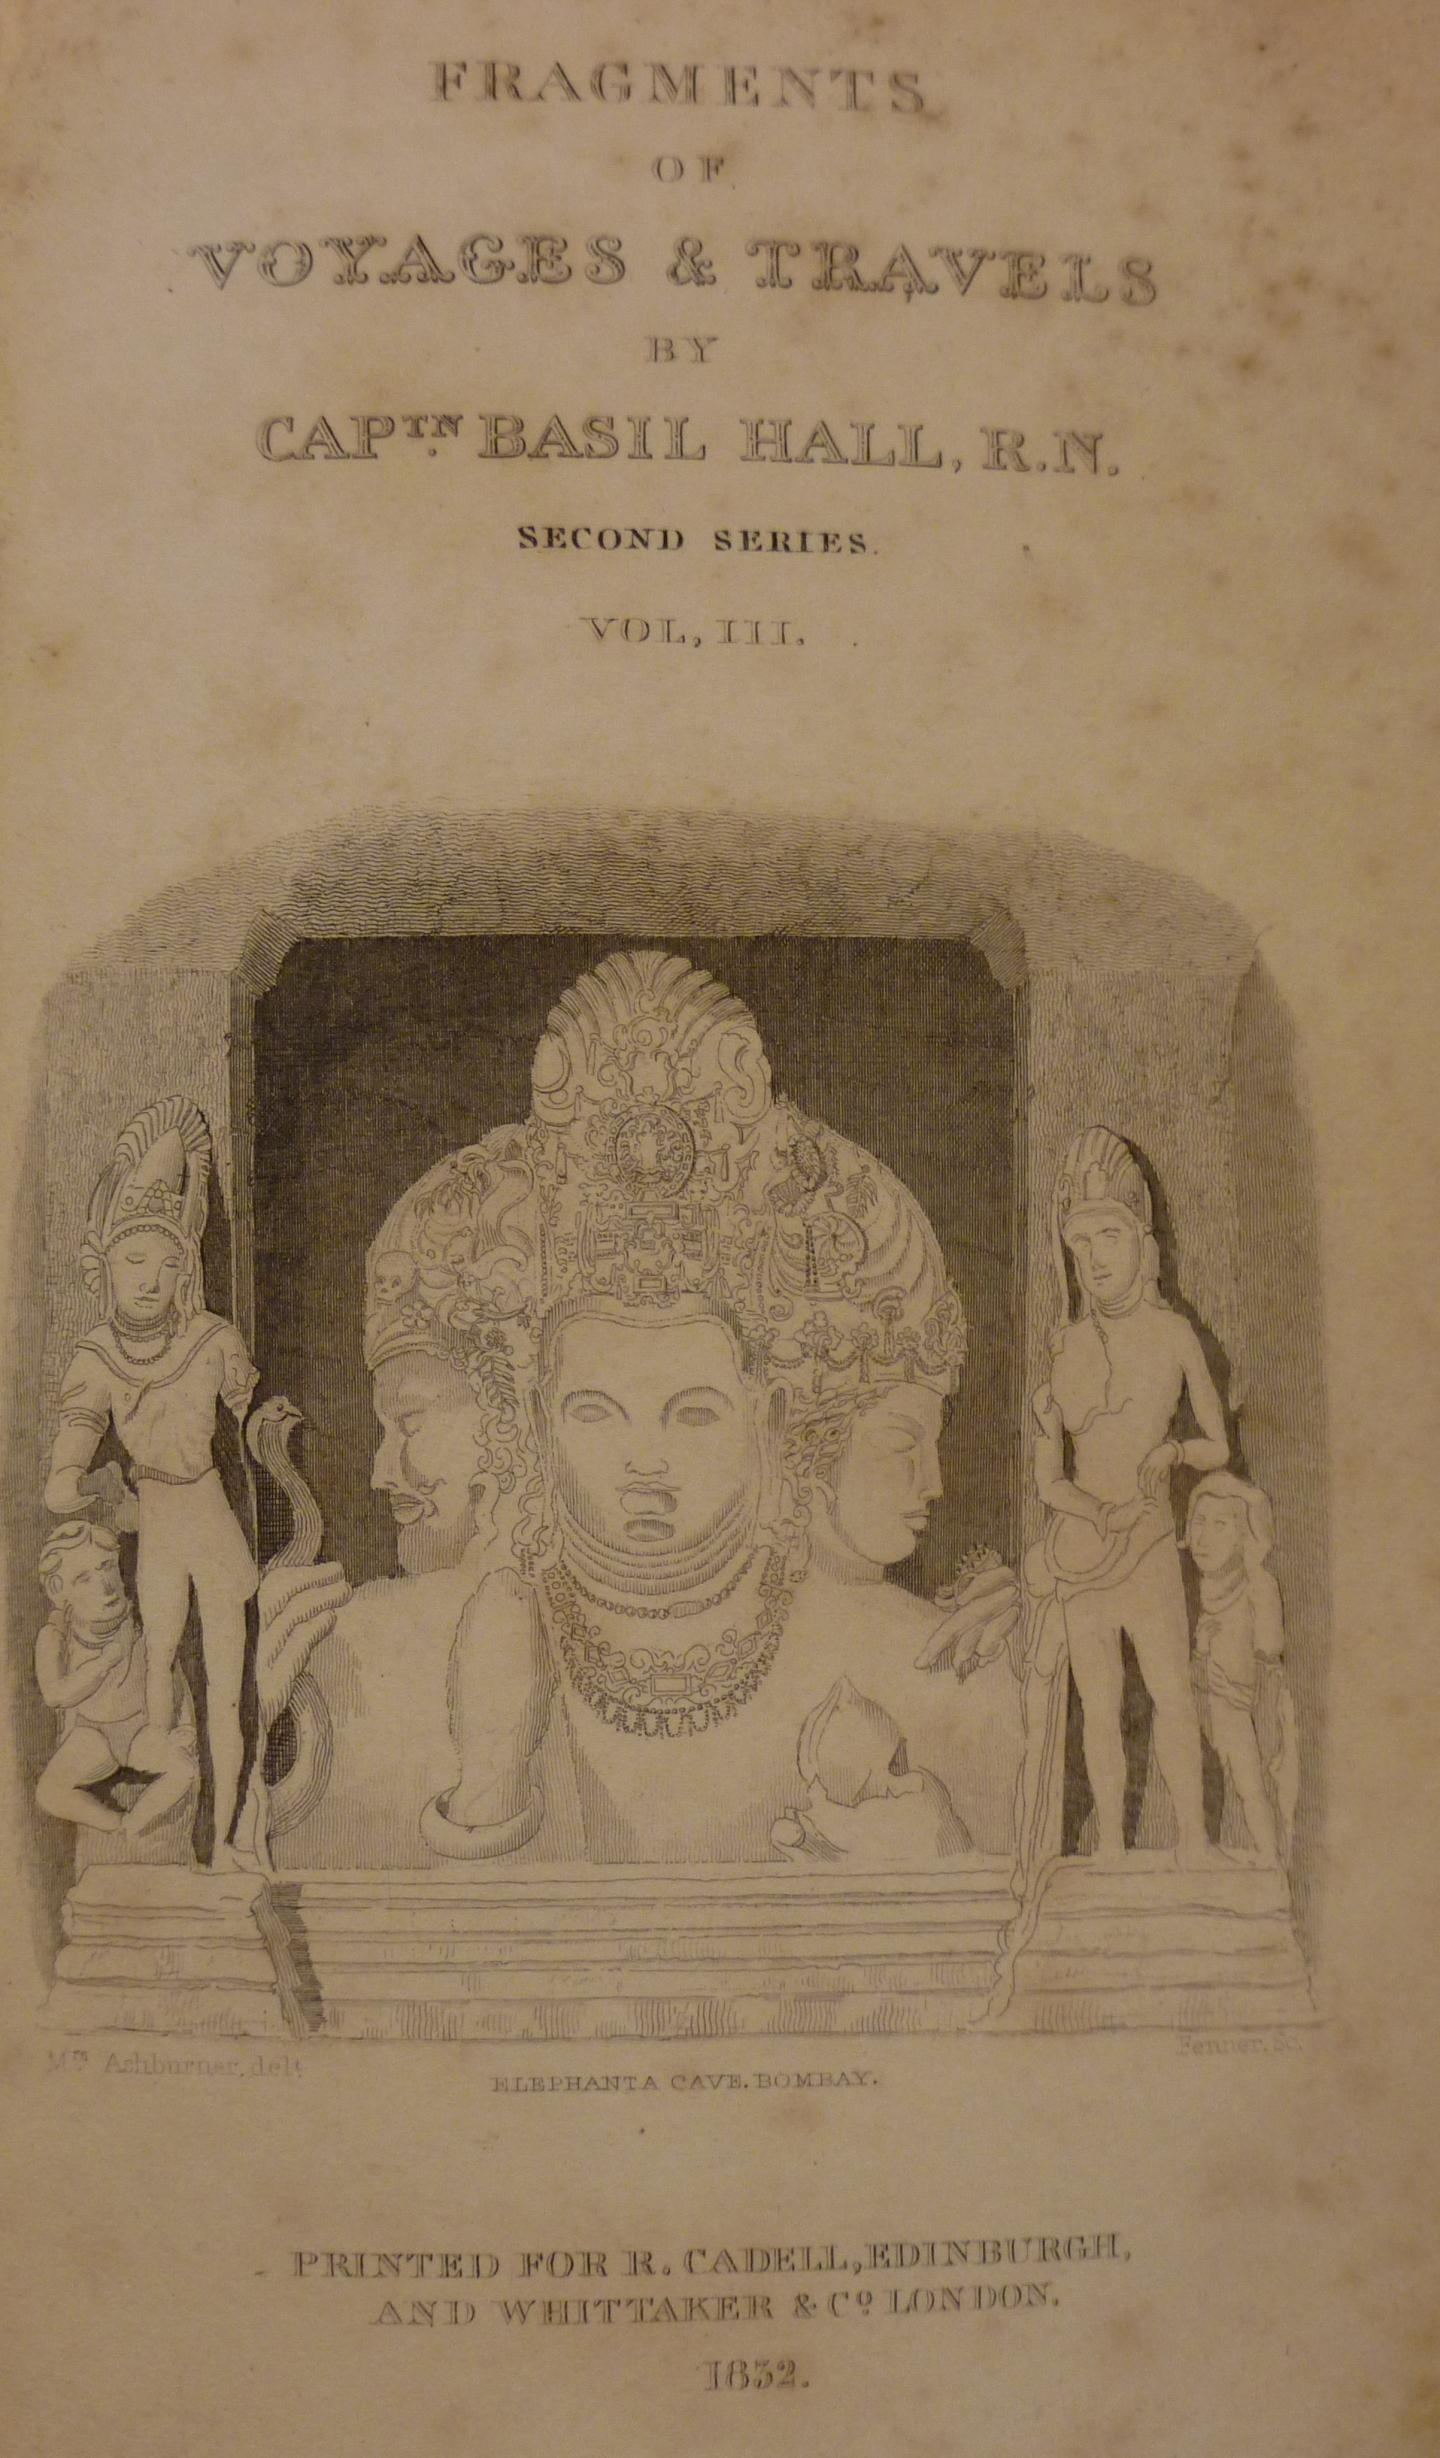 The title page of the Fragments of Voyages and Travels Volume 3, Second series (RMG ID: PBE0288)